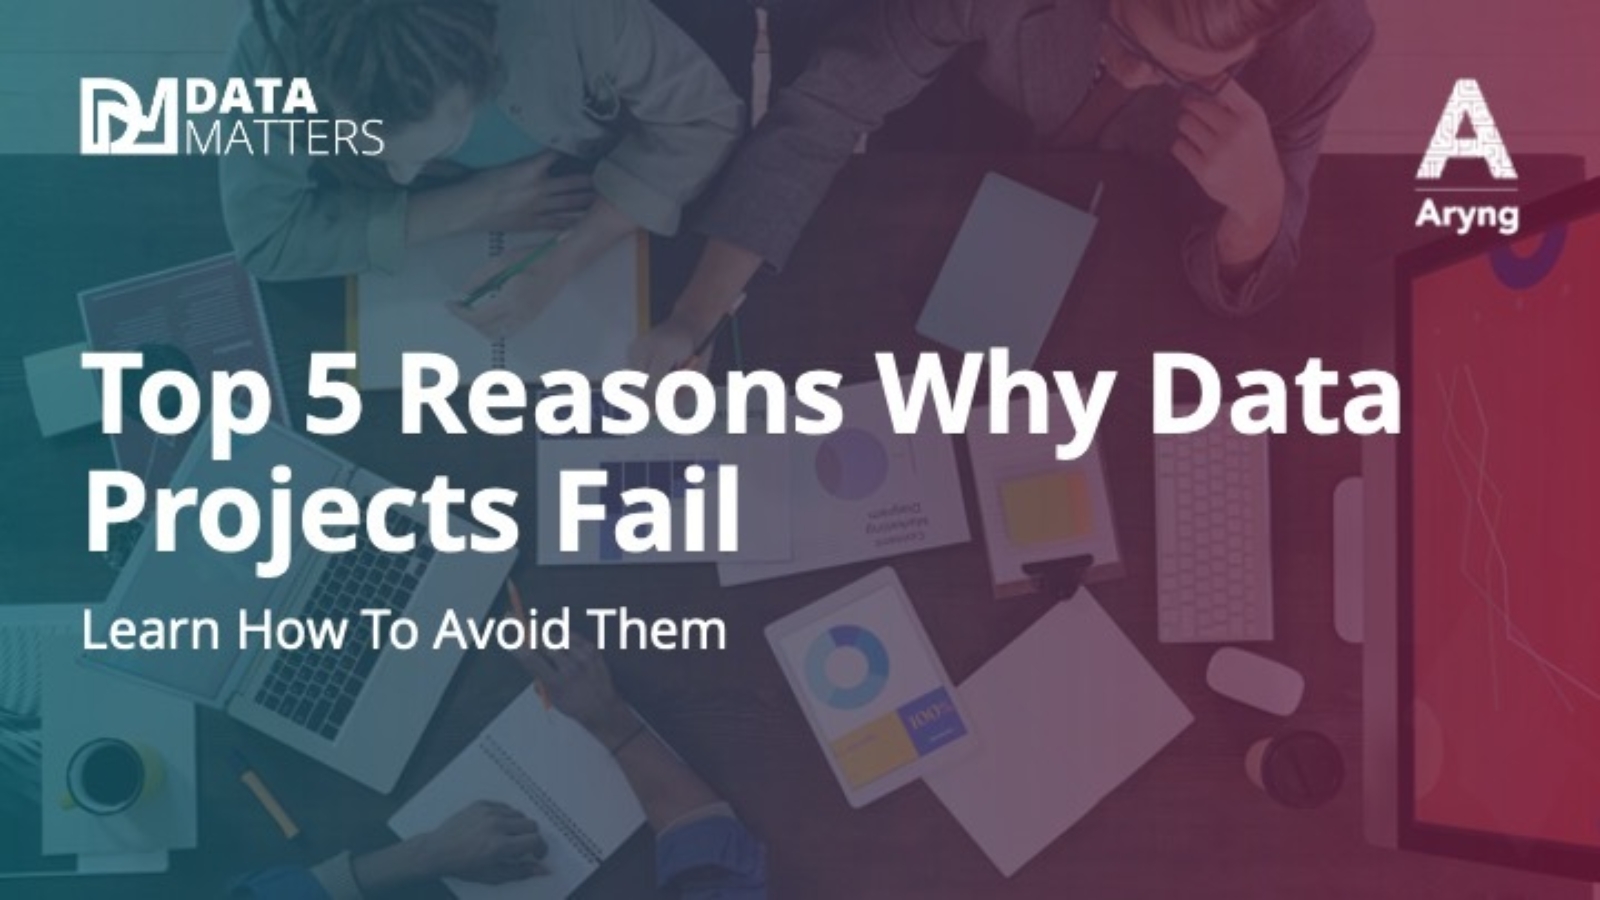 Top 5 reasons why Data Projects fail